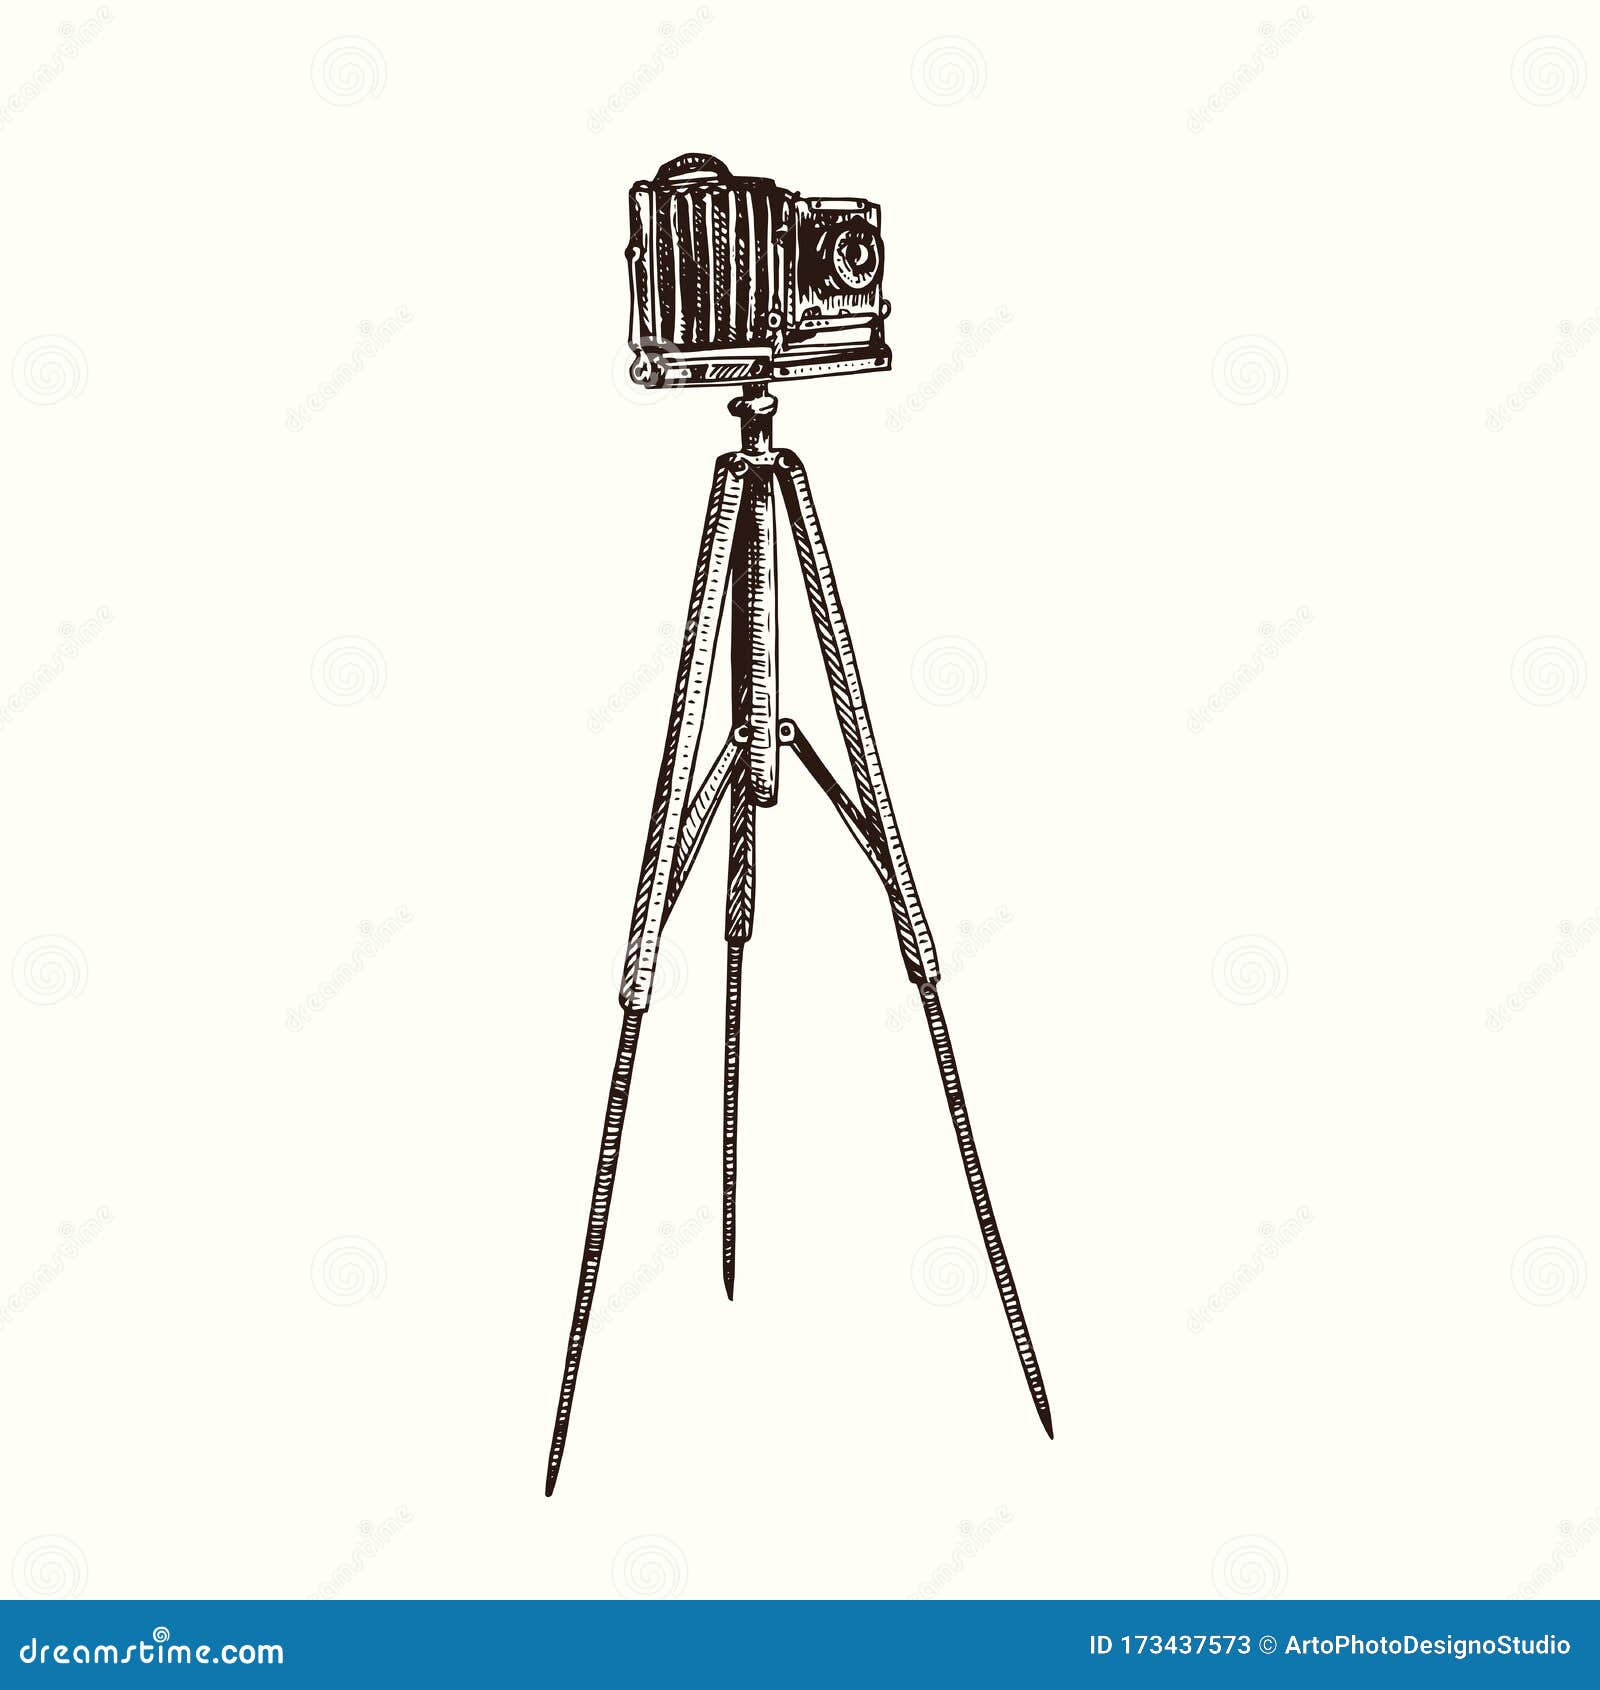 retro photo camera on tripod, hand drawn doodle, drawing in gravure style, sketch 